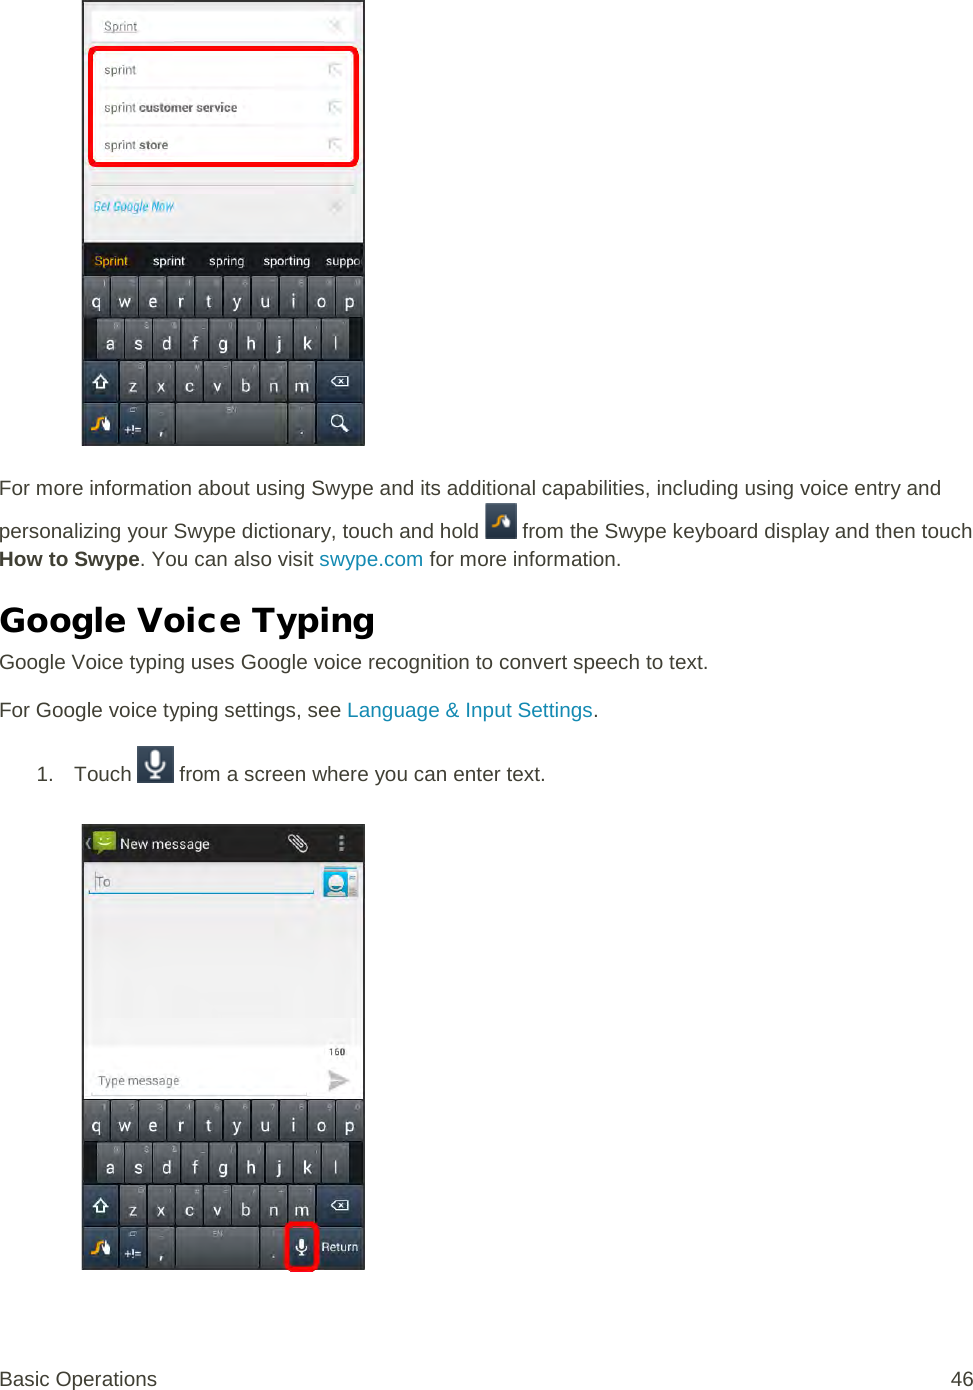   For more information about using Swype and its additional capabilities, including using voice entry and personalizing your Swype dictionary, touch and hold   from the Swype keyboard display and then touch How to Swype. You can also visit swype.com for more information. Google Voice Typing Google Voice typing uses Google voice recognition to convert speech to text. For Google voice typing settings, see Language &amp; Input Settings. 1. Touch   from a screen where you can enter text.   Basic Operations 46 